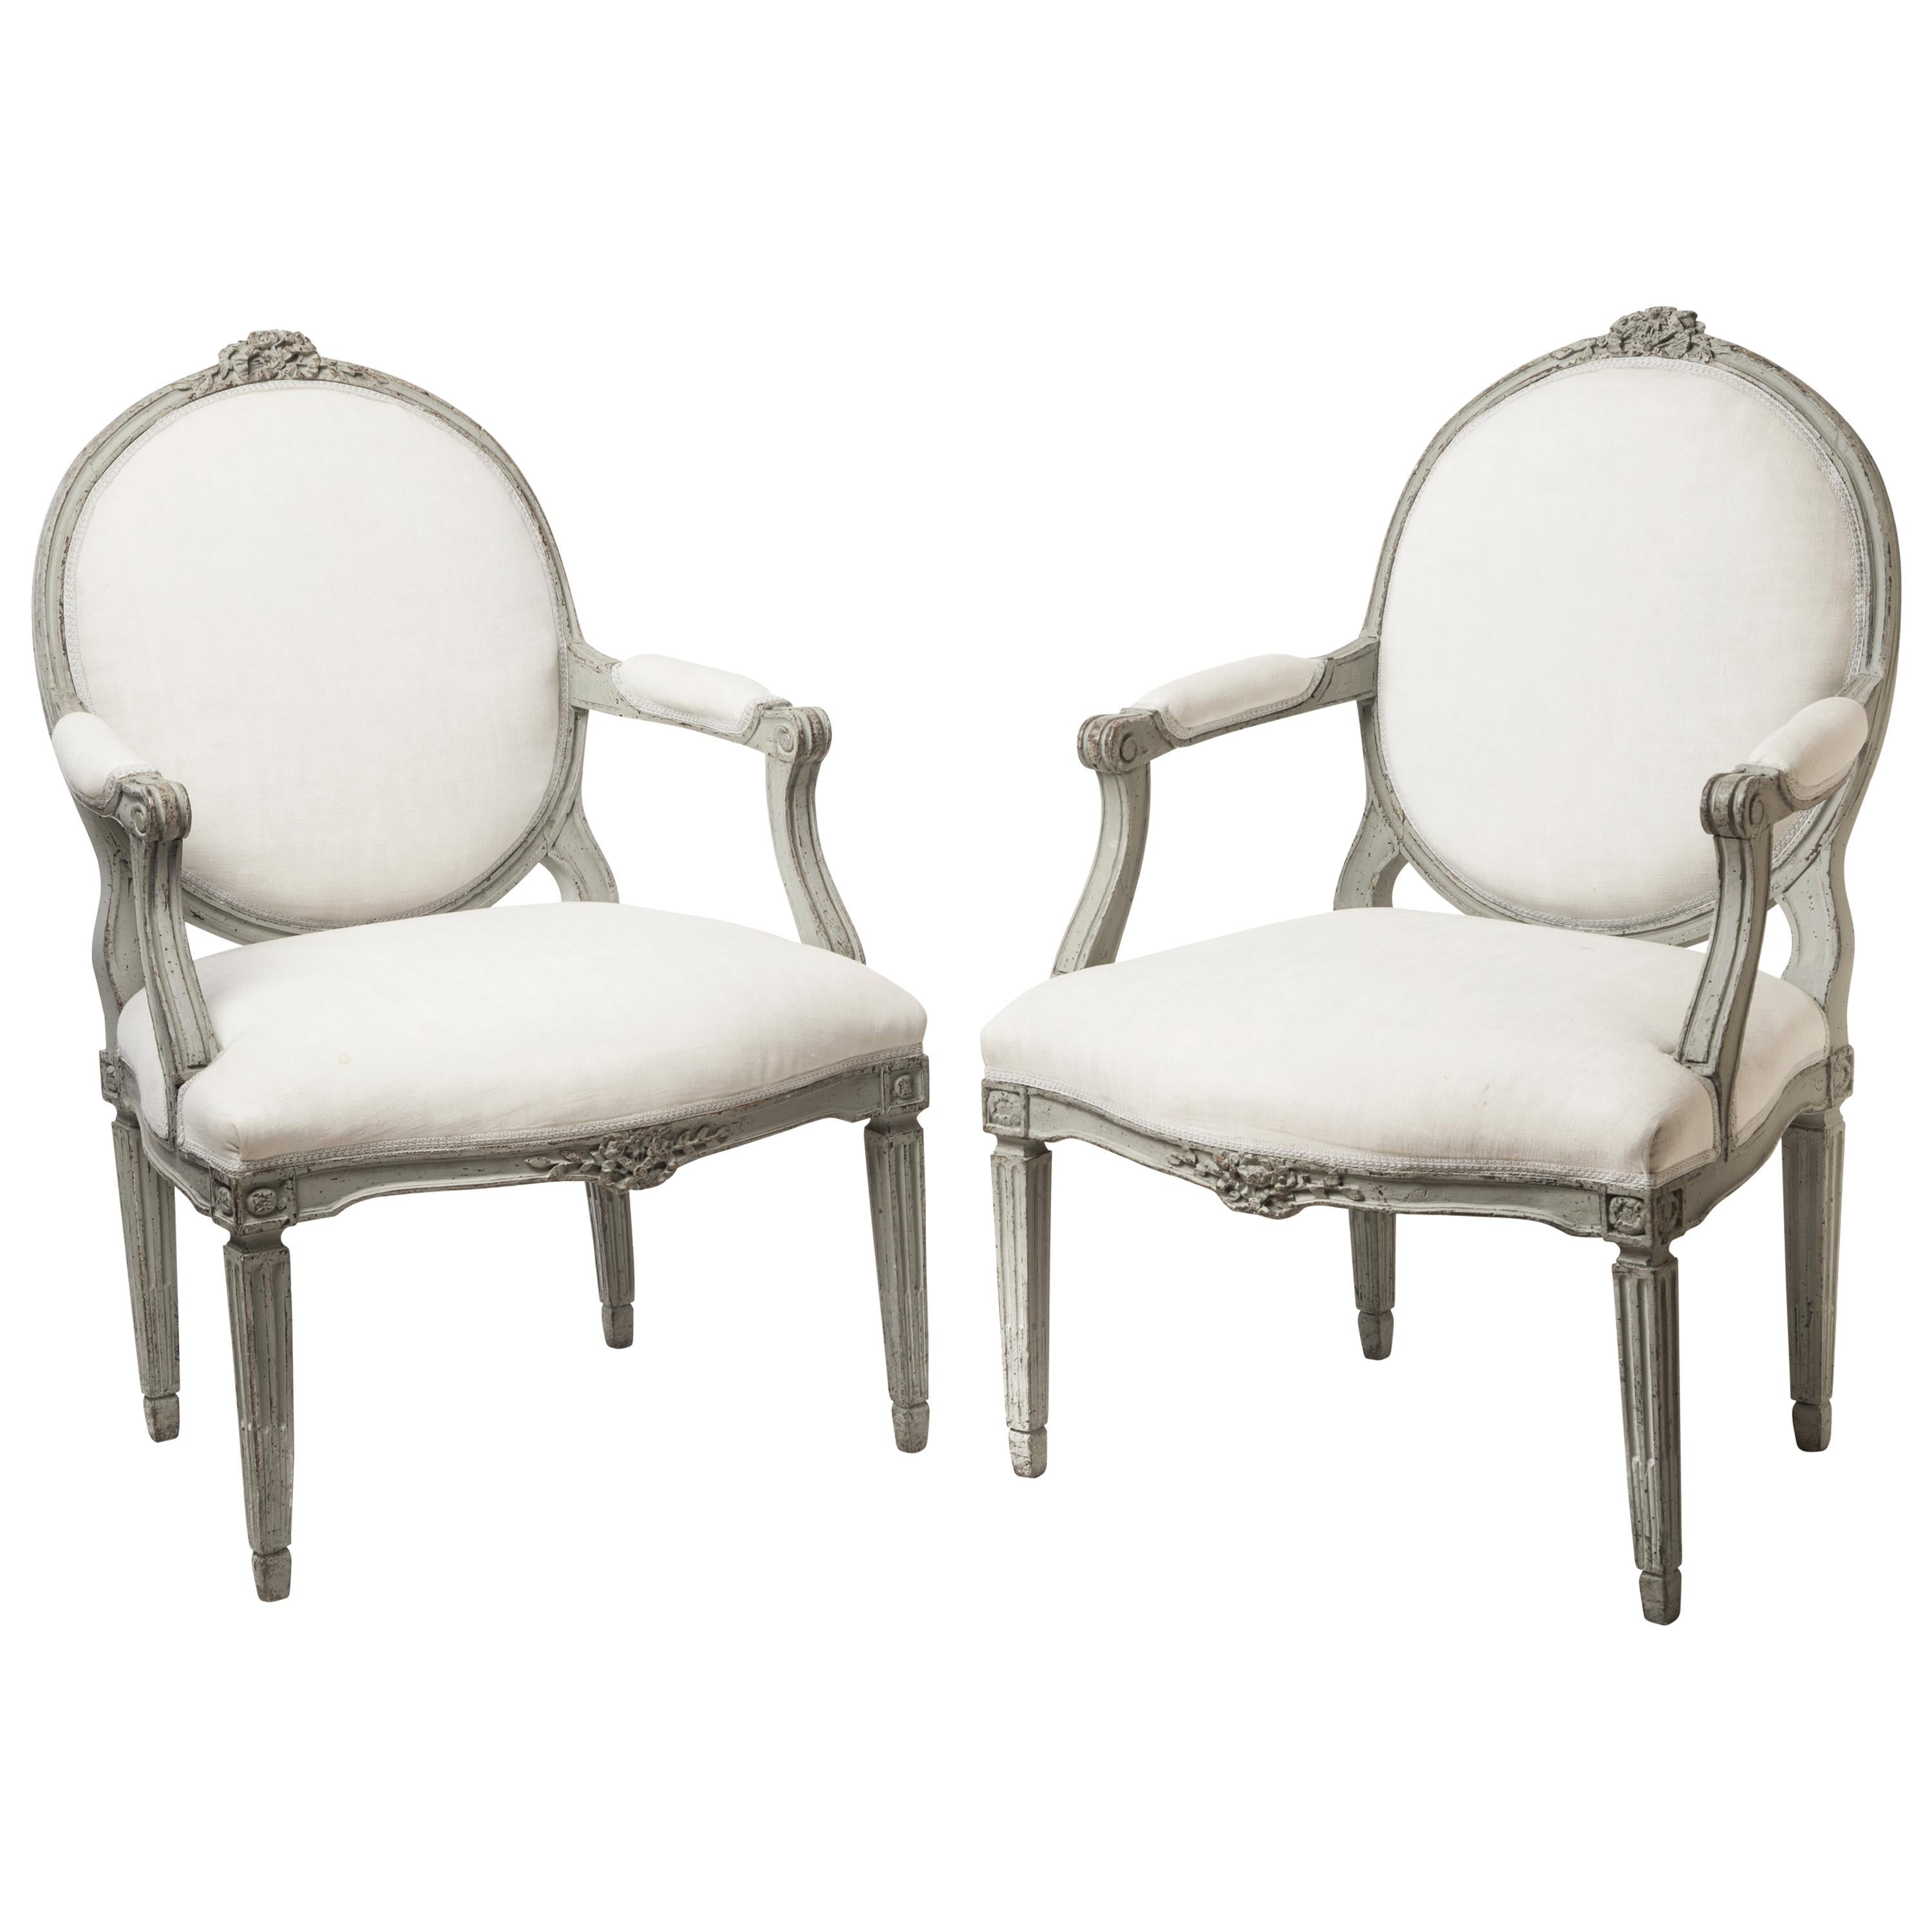 Pair of Antique Swedish Fauteuils / Armchairs 18th Century For Sale